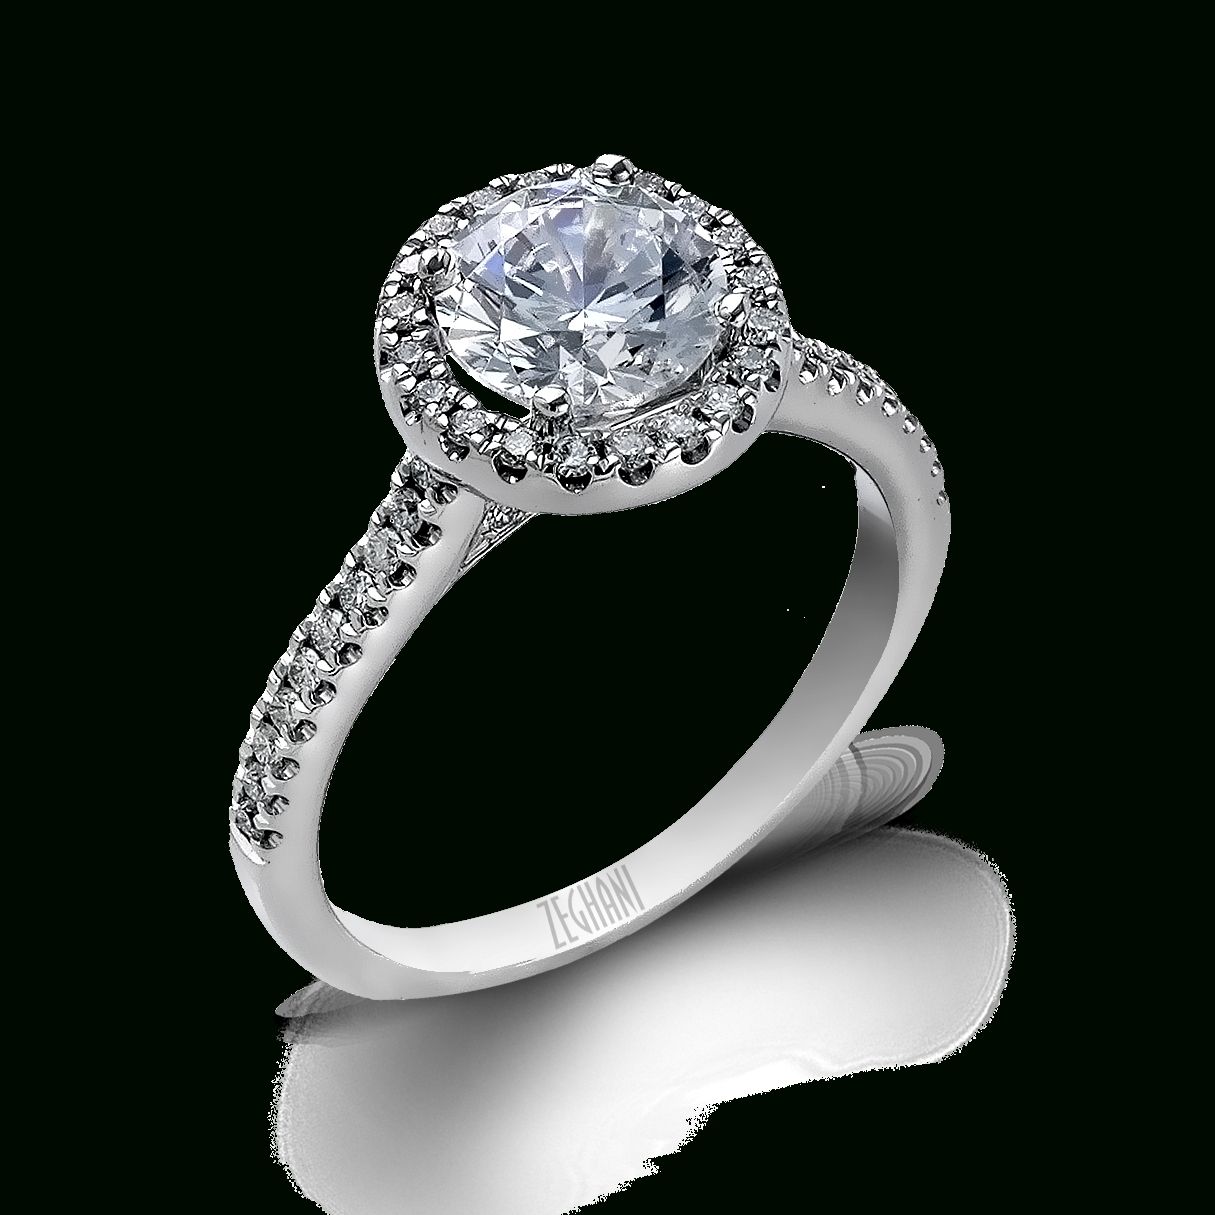 Zr498 Engagement Ring – Zeghani Pertaining To Round Cut Halo Engagement Rings (View 11 of 15)